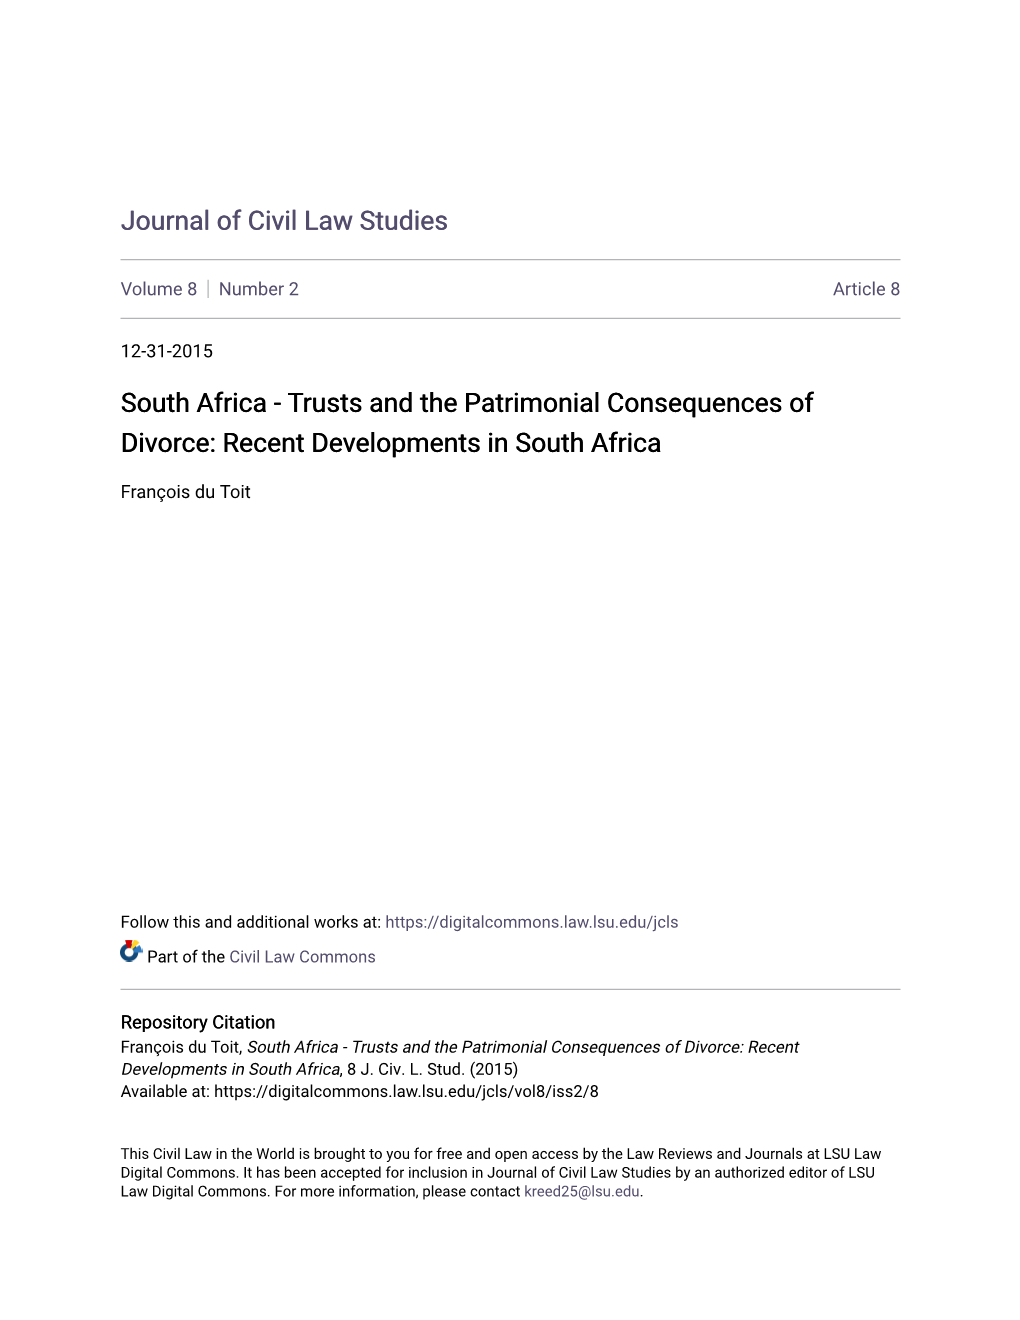 South Africa - Trusts and the Patrimonial Consequences of Divorce: Recent Developments in South Africa